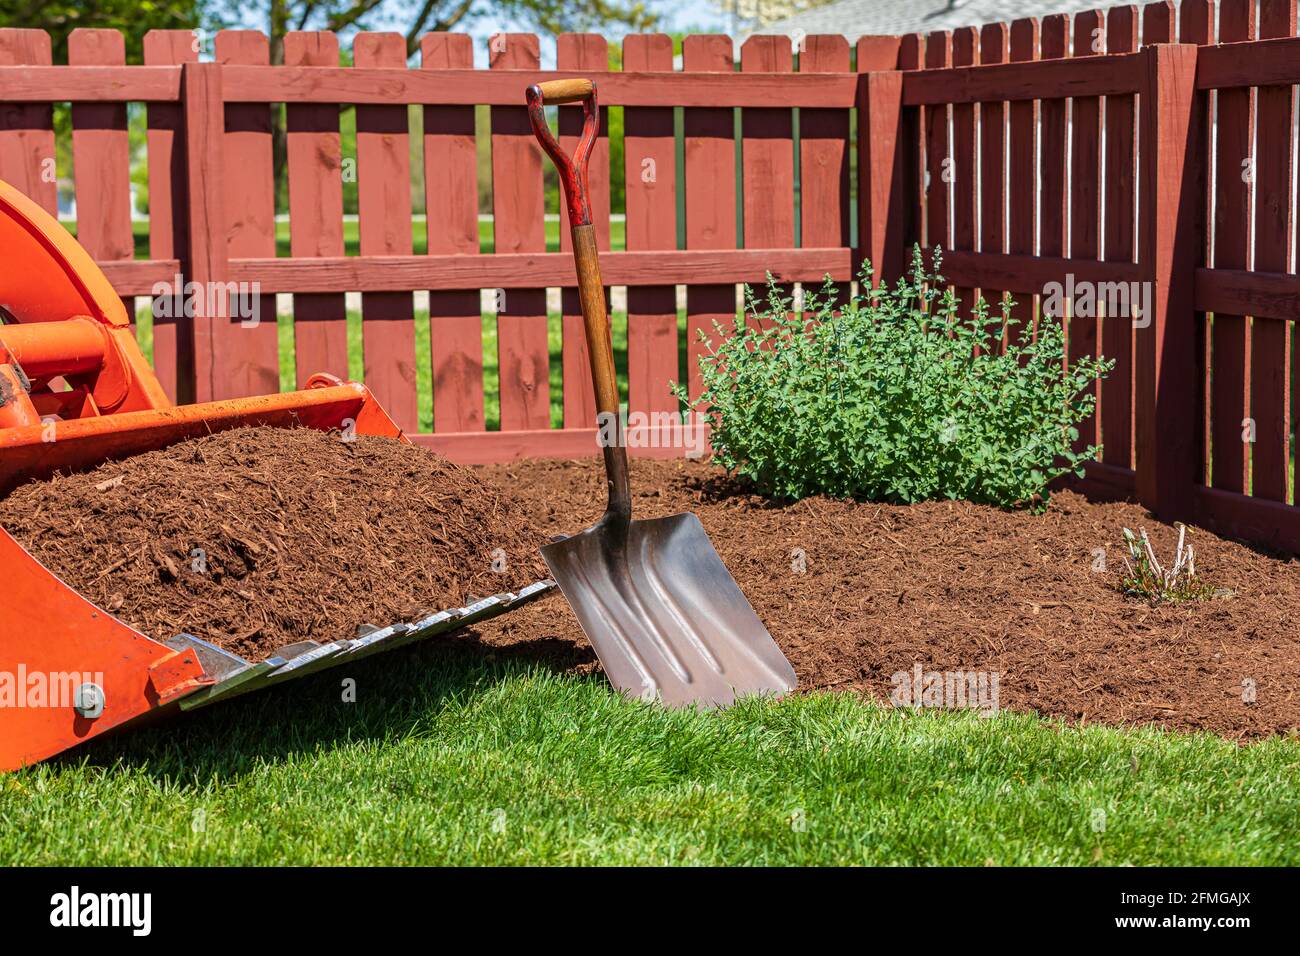 Tractor loader with wood chips or mulch and flowerbed. Lawncare, gardening and backyard landscaping concept Stock Photo